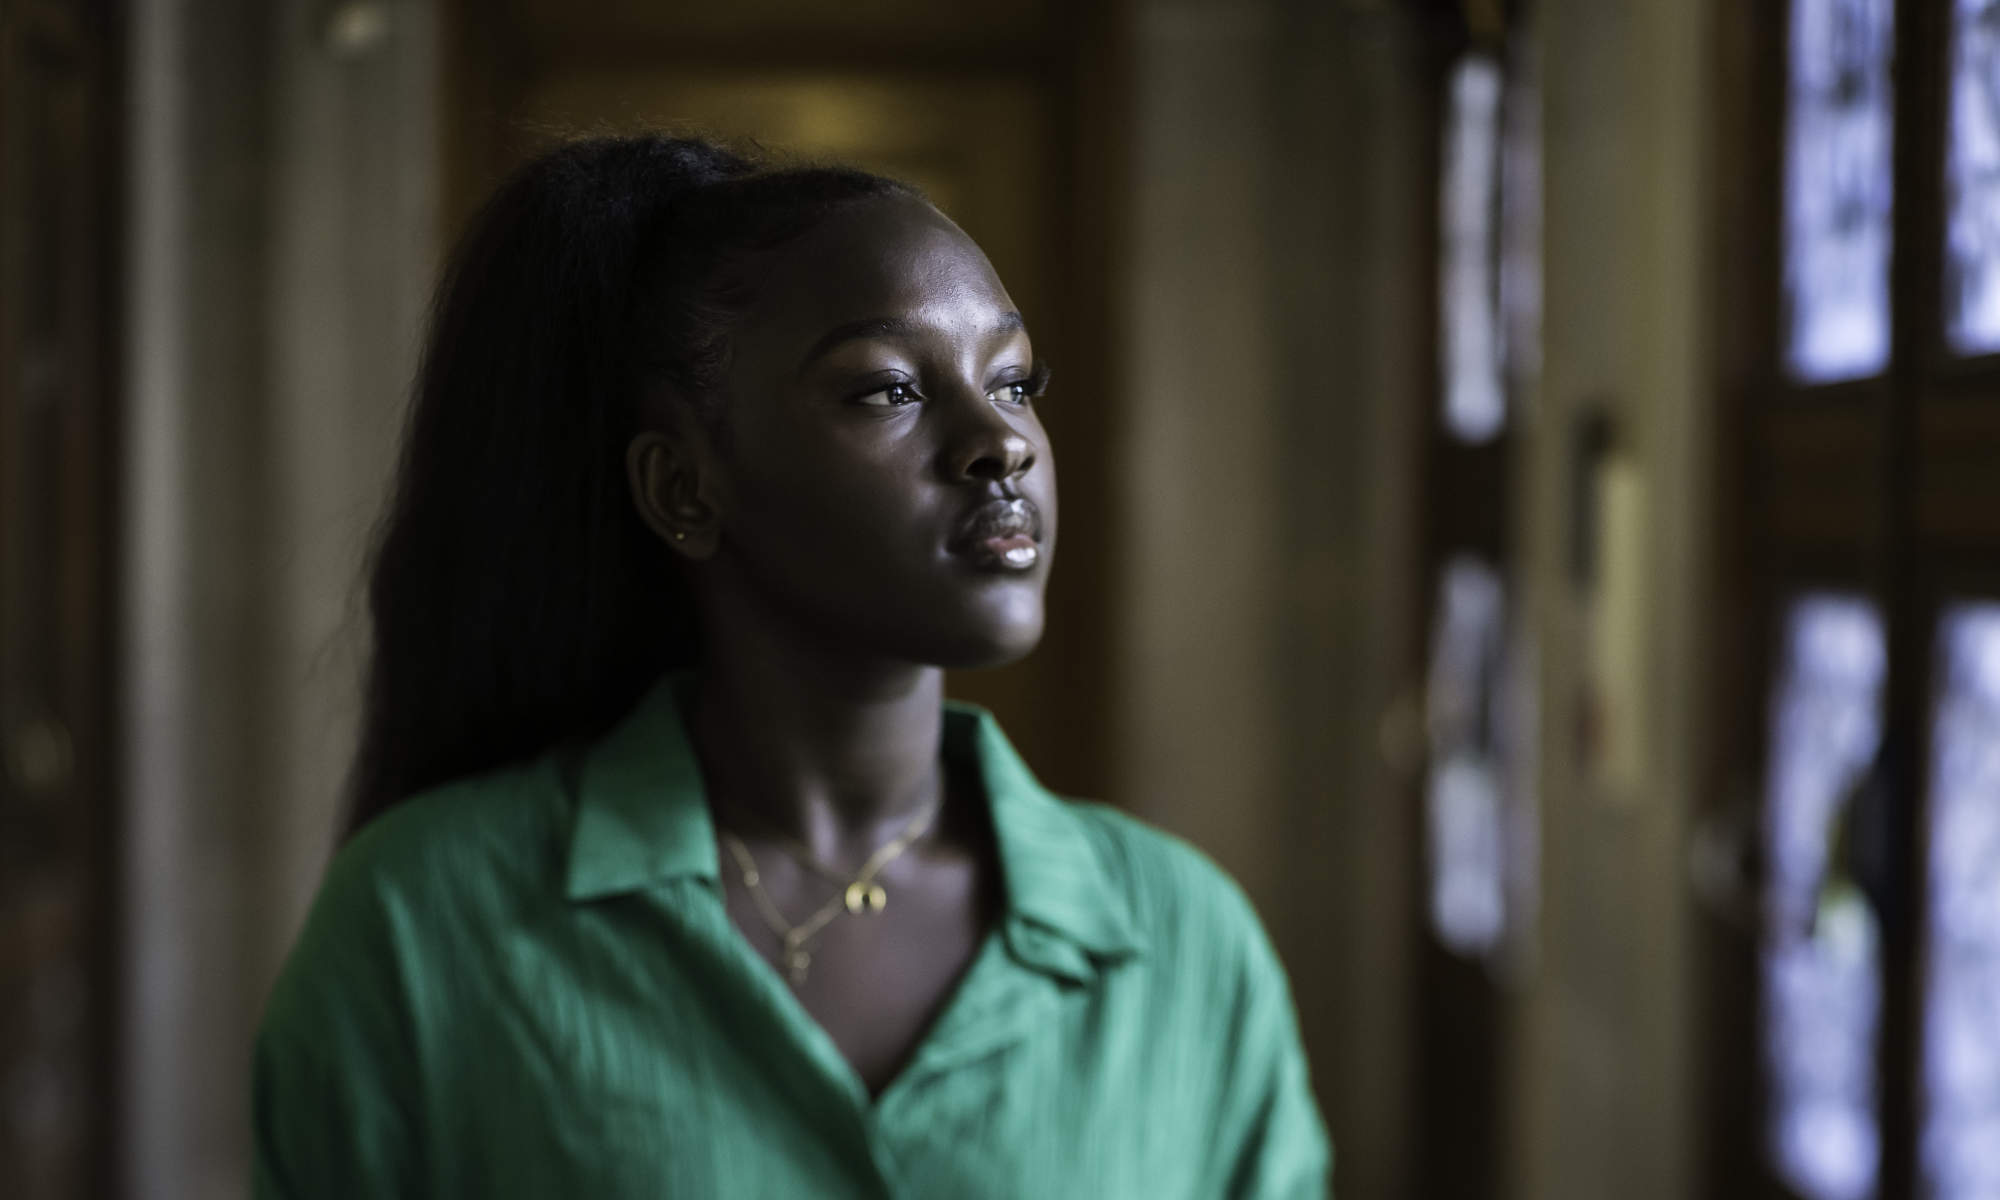 Fatou Jobe wearing bright green while looking off camera in a library entryway.